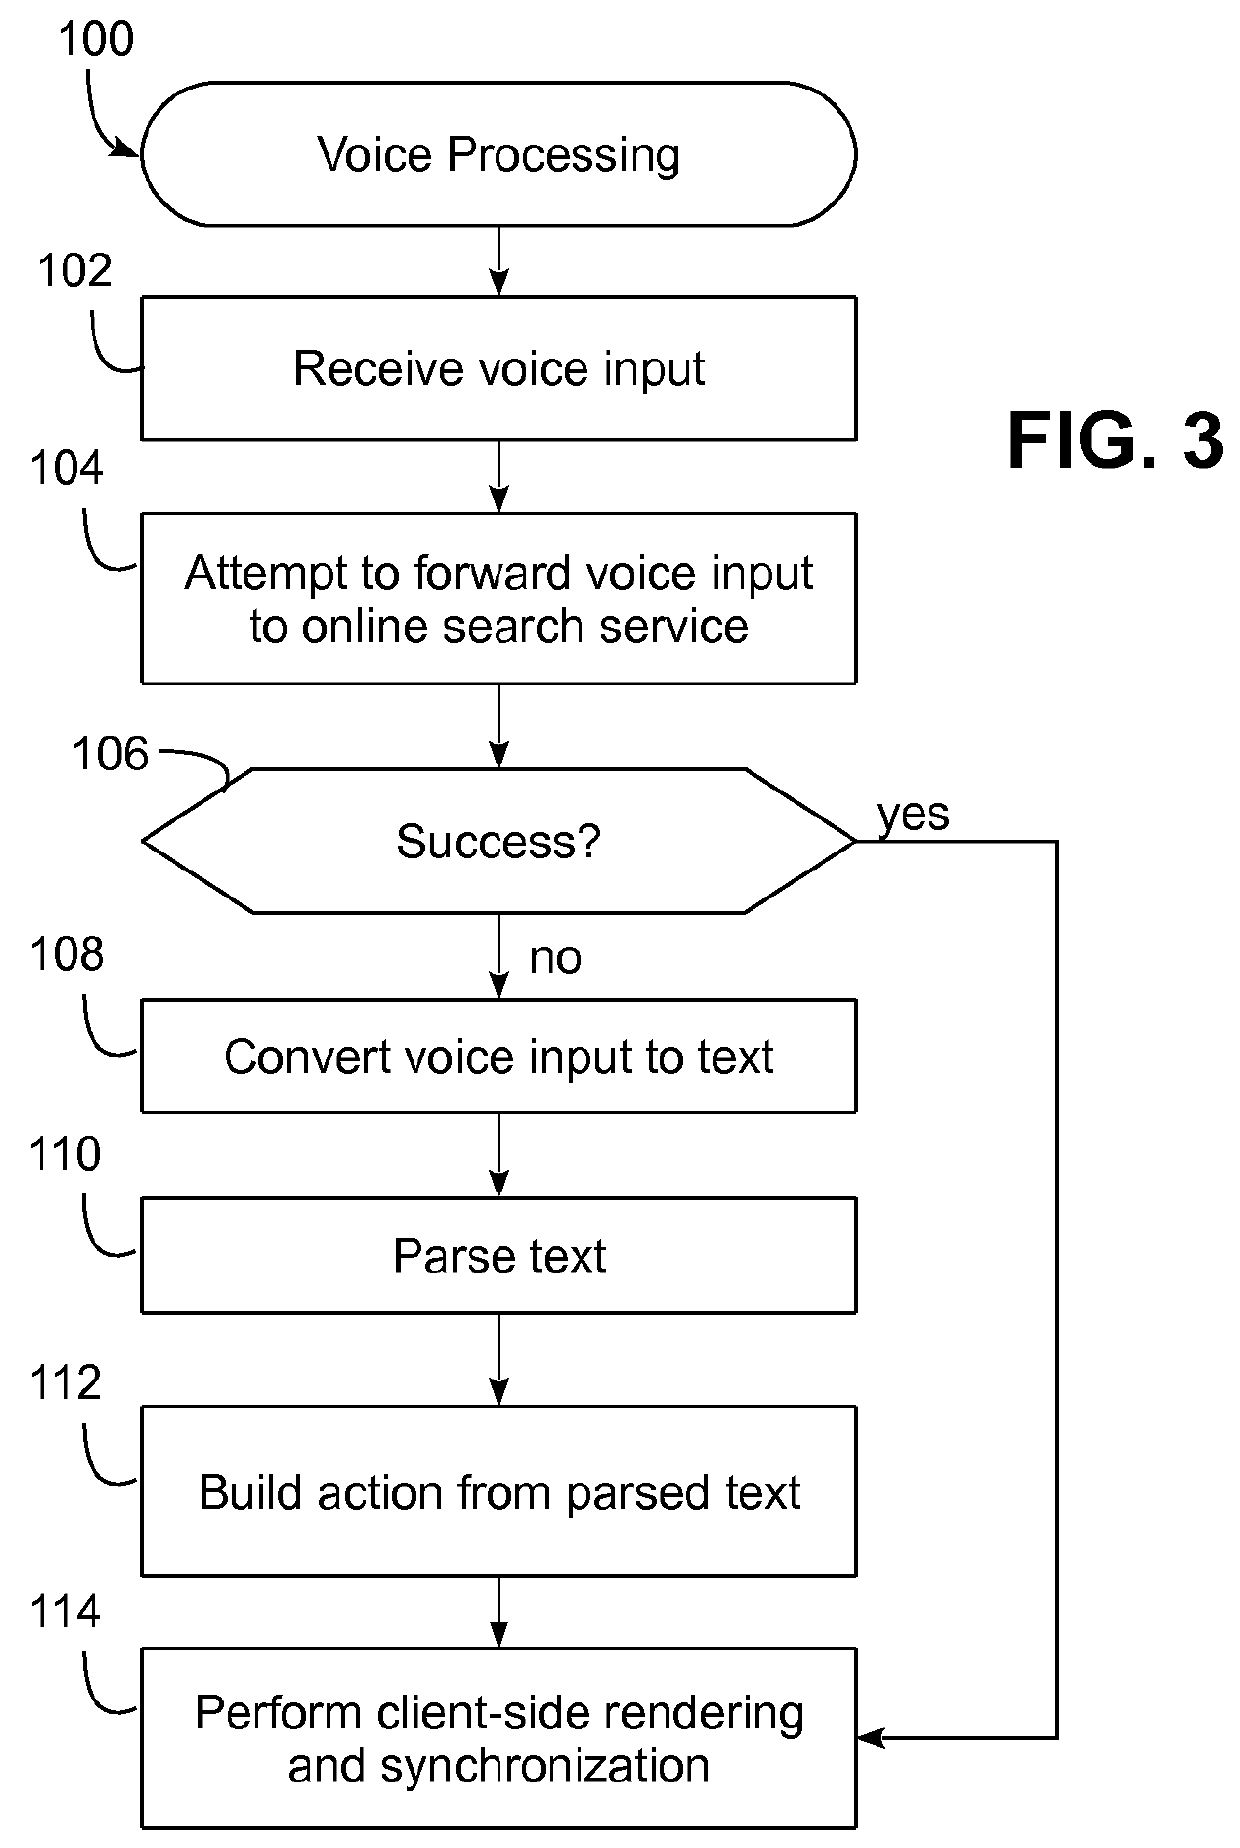 Context-sensitive dynamic update of voice to text model in a voice-enabled electronic device